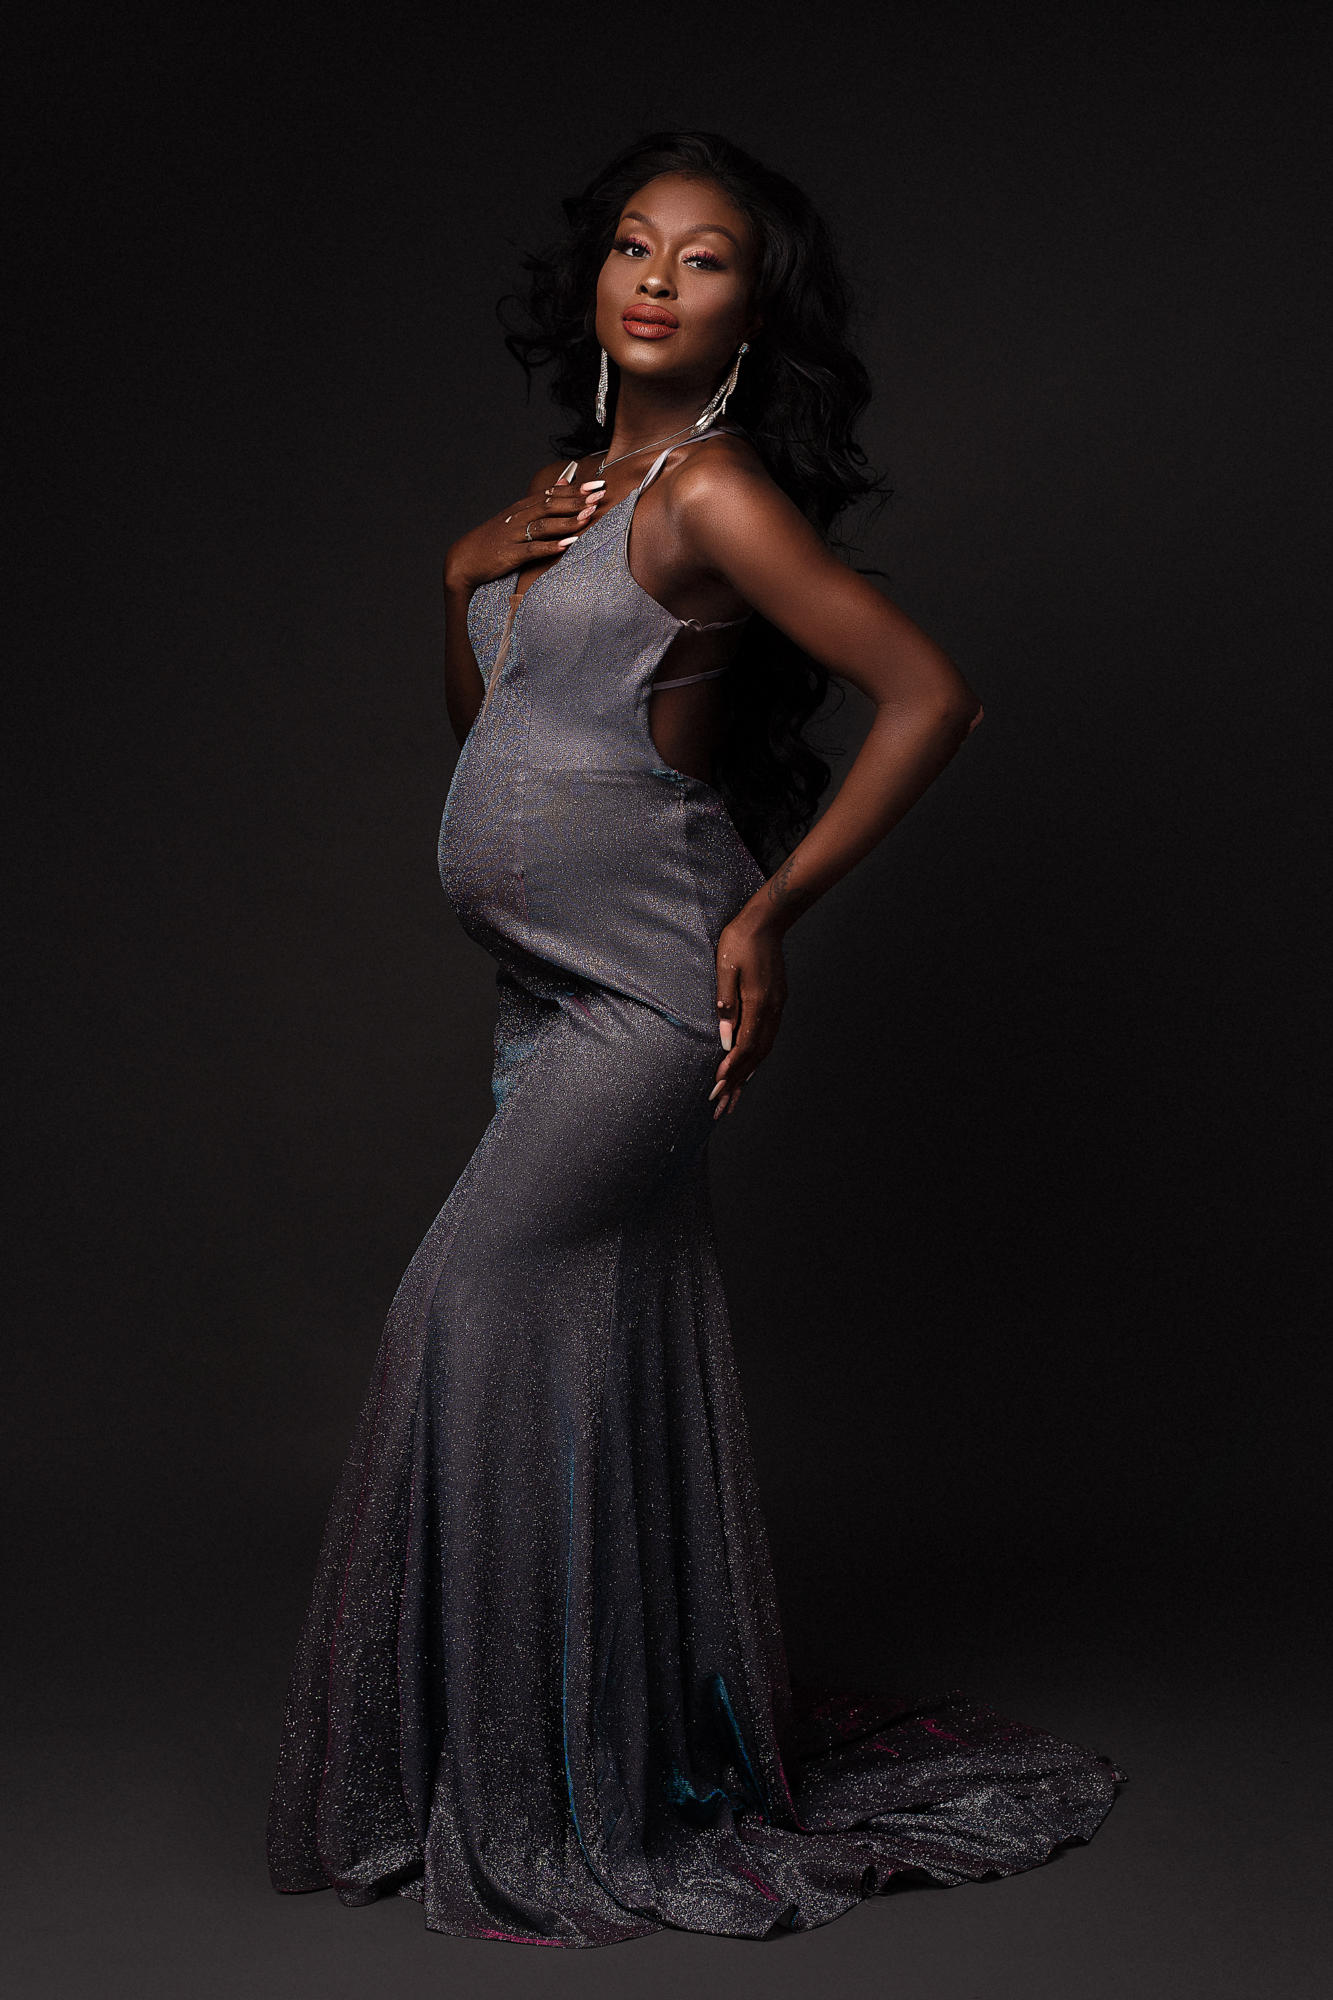 Pregnant Woman Posing with her hand resting on her chest and her other on her back. Wearing a ball gown